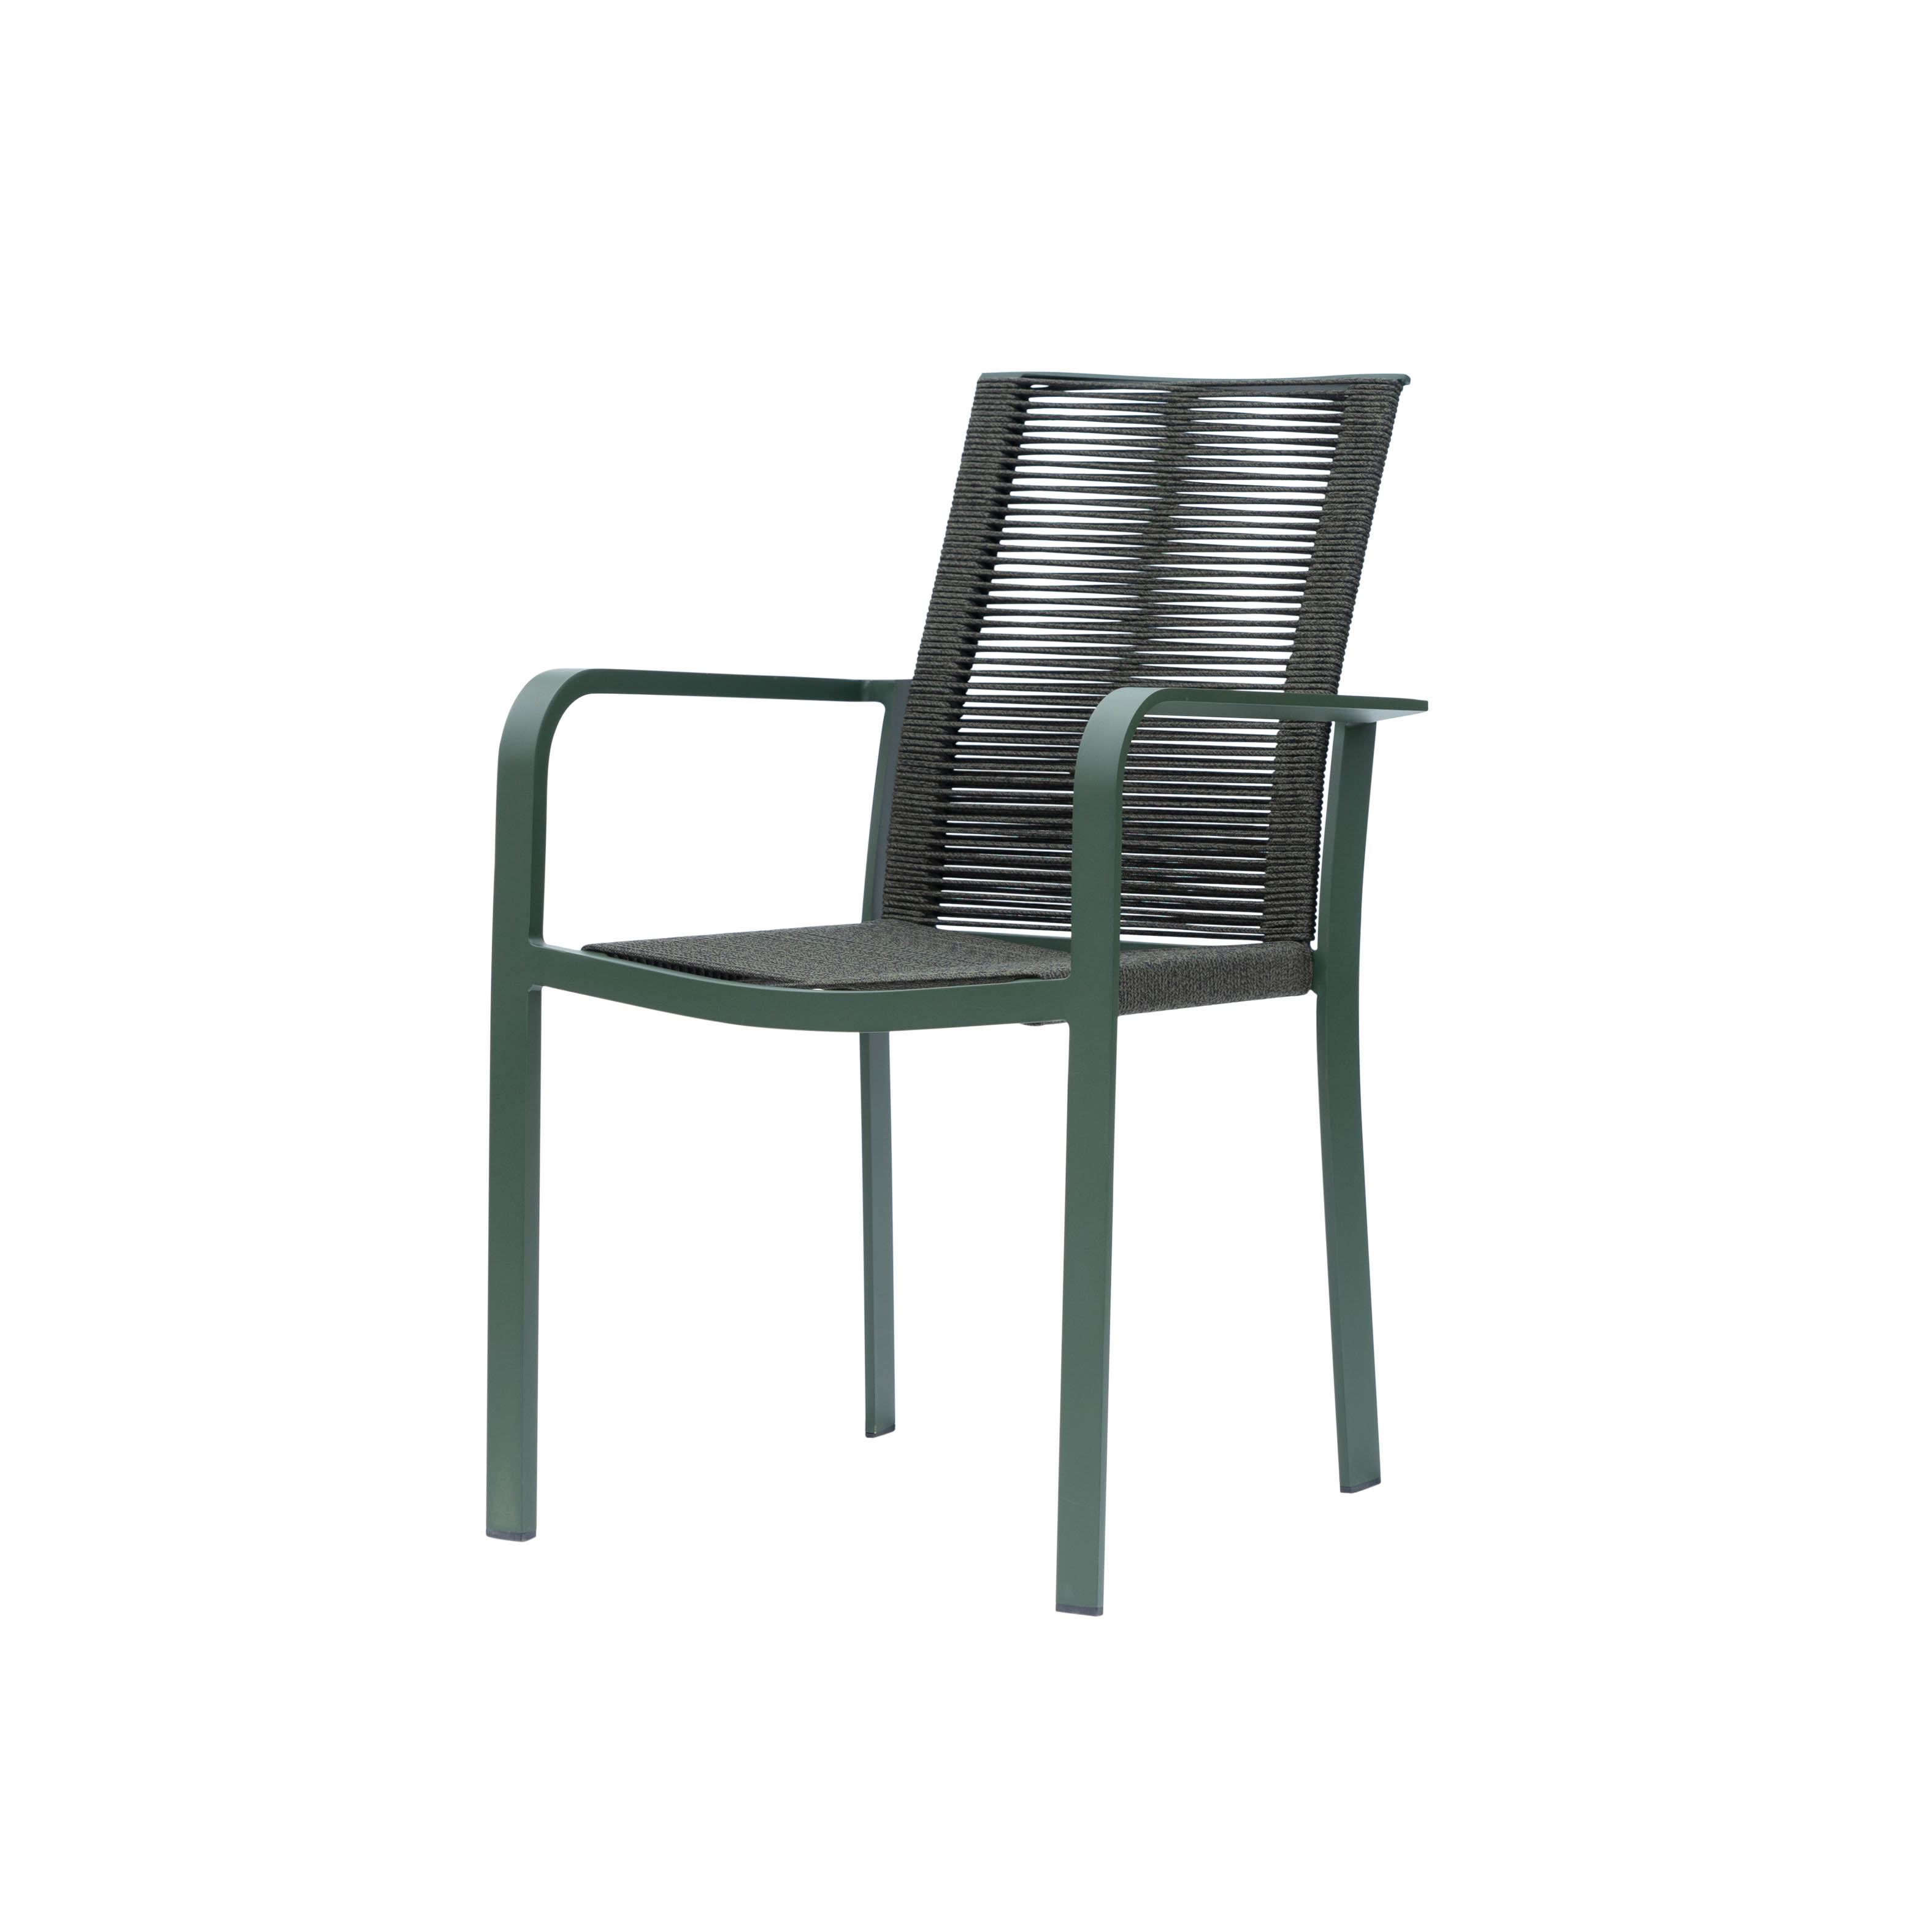 Linz dining chair S5